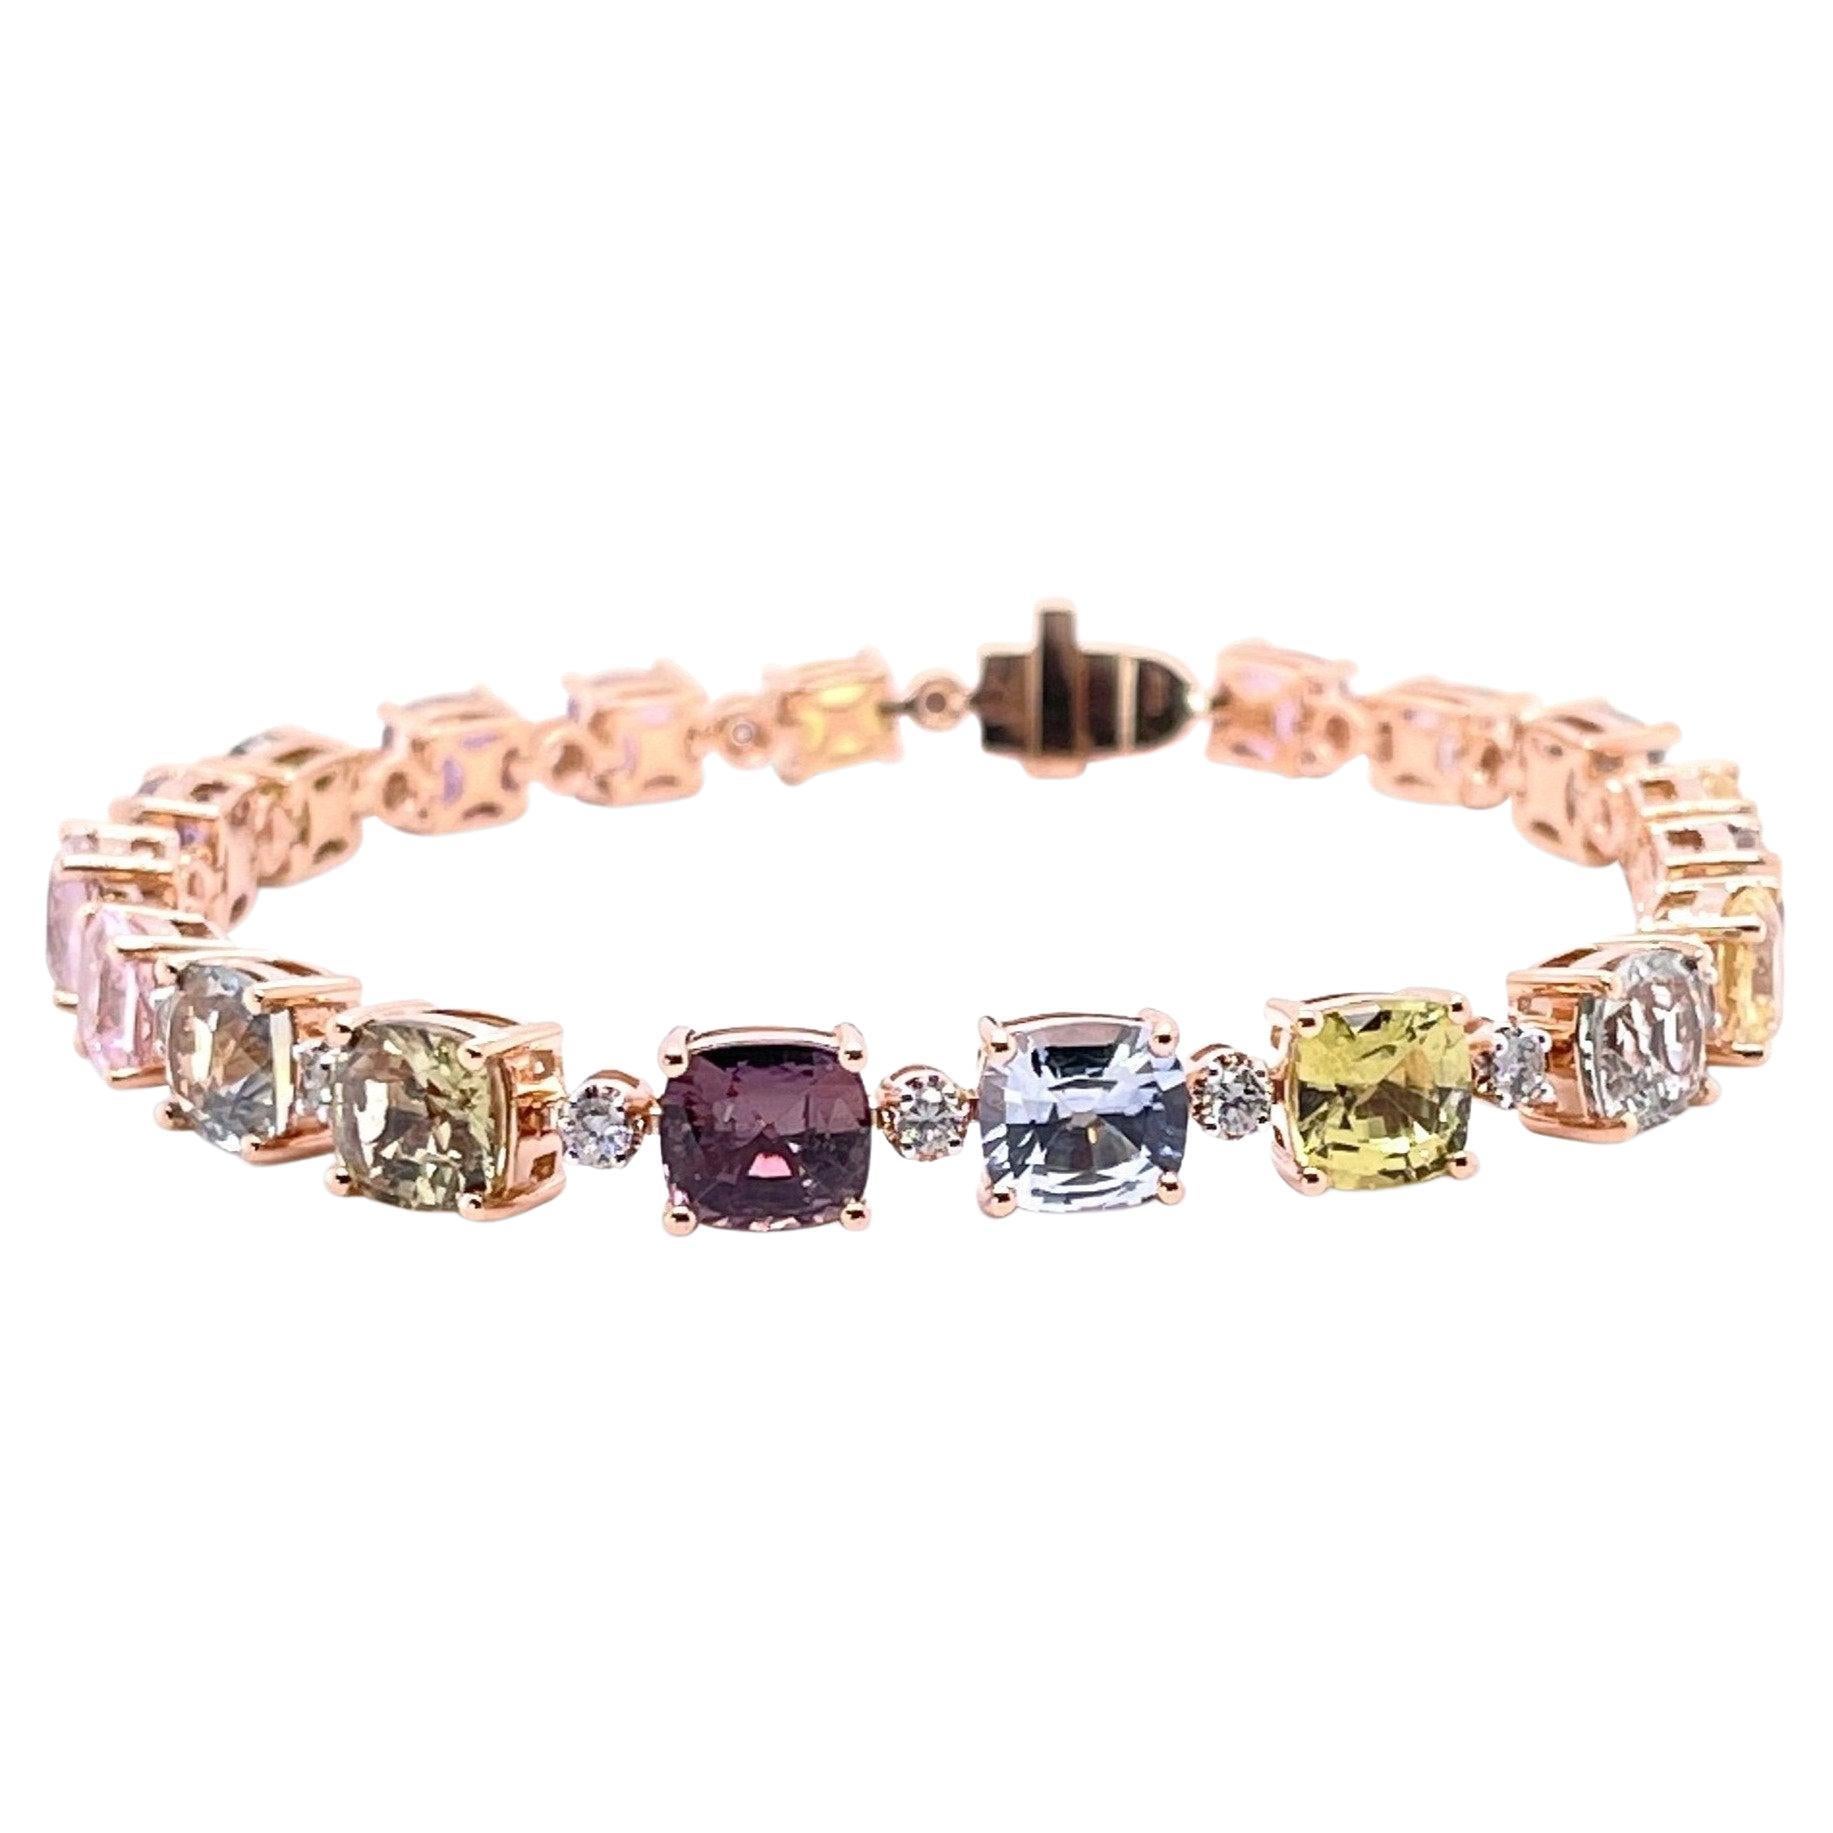 Cushion cut NO HEAT (based on my opinion) sapphires, crafted in eighteen karat rose gold, featuring a stunning selection twenty claw set round brilliant cut diamonds. complimented with a beautiful polished finish design. 

The bracelet measures 18cm